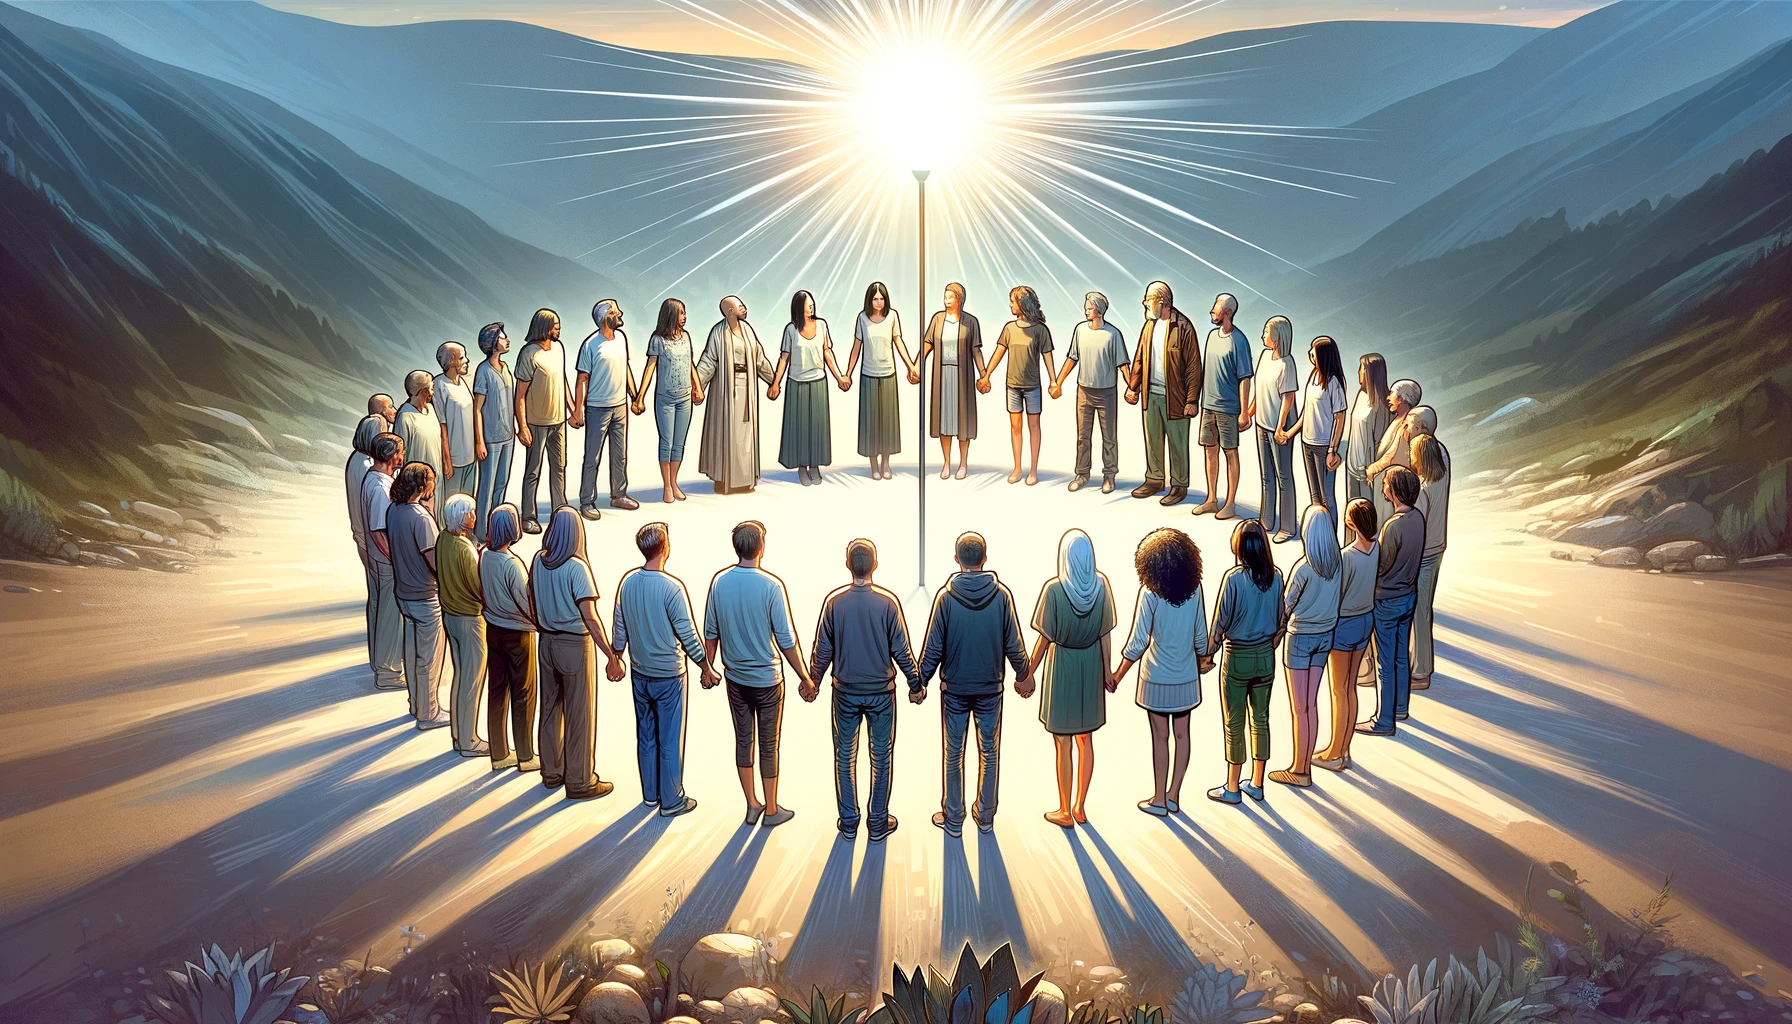 illustration depicting the concept of unity and collective strength in recovery. The image shows a diverse group of people standing toge